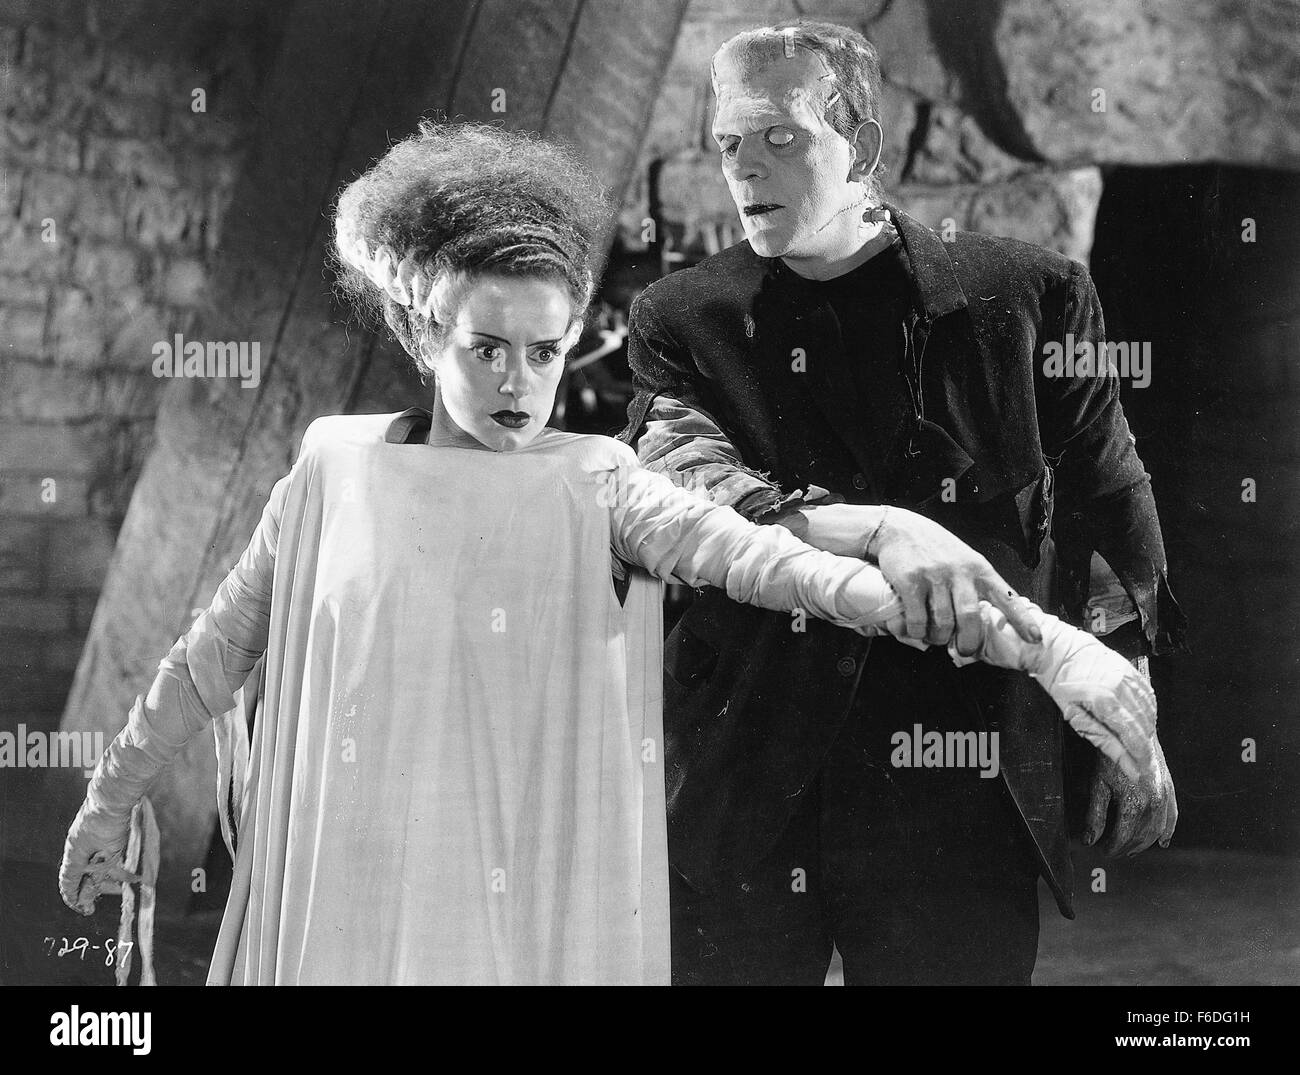 Film Title: BRIDE OF FRANKENSTEIN. DIRECTOR: James Whale. STUDIO: Universal Pictures. PLOT: Darkly witty sequel to the classic Frankenstein film about a mad scientist building a mate for his monster. Having escaped the fiery castle that engulfed him at the end of the 1931 horror classic Frankenstein, the monster (Boris Karloff) is back - now more civilized and human - even with a limited vocabulary. Baron Henry Frankenstein (Colin Clive), the monster's tormented creator, is drawn back to his experiments by effeminate, sardonic Dr. Pretorious (Ernest Thesiger). The demented Henry is convinced t Stock Photo